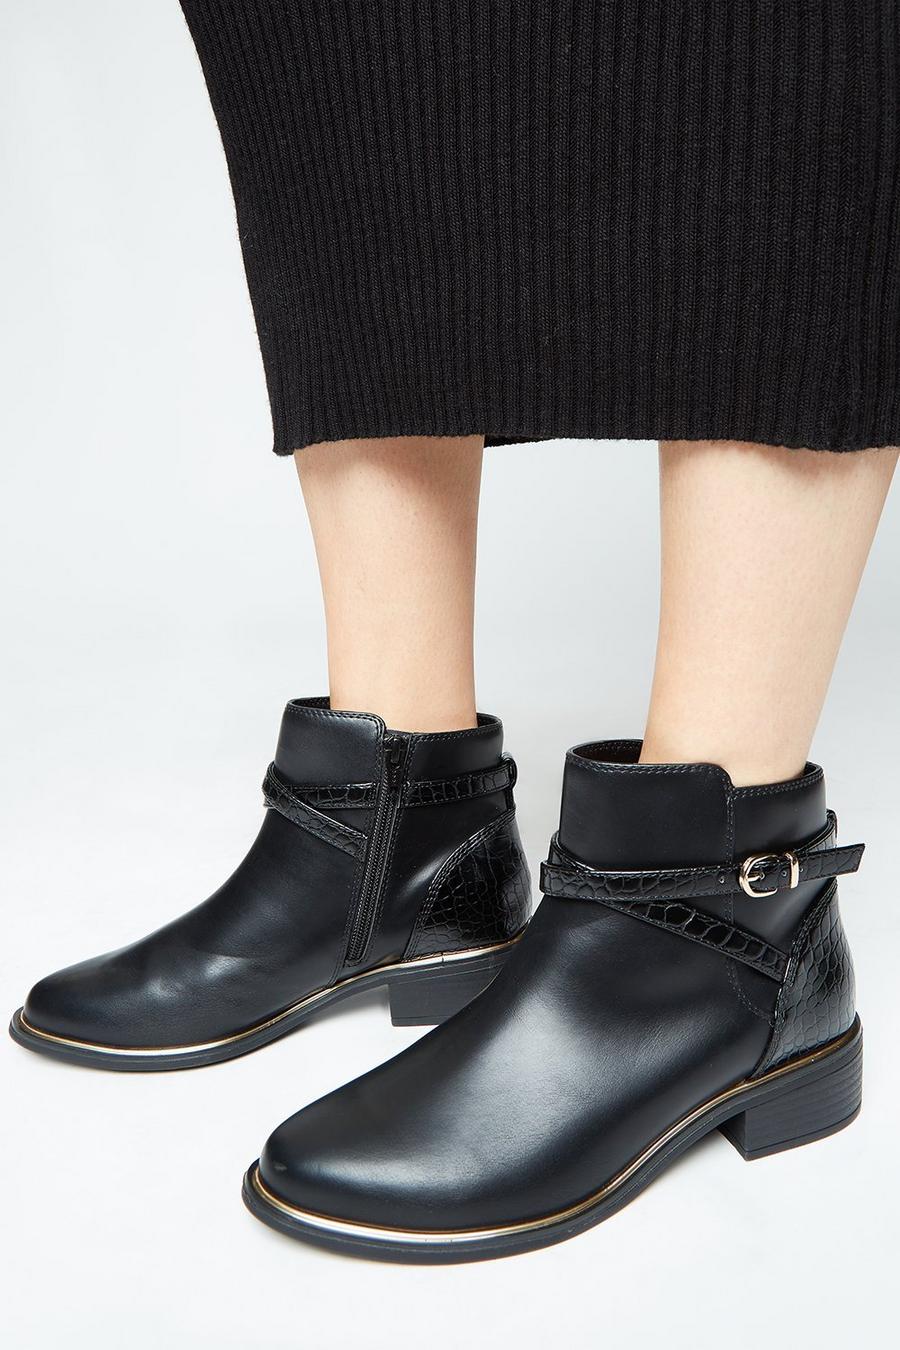 Wide Fit Avery Cross Strap Ankle Boot